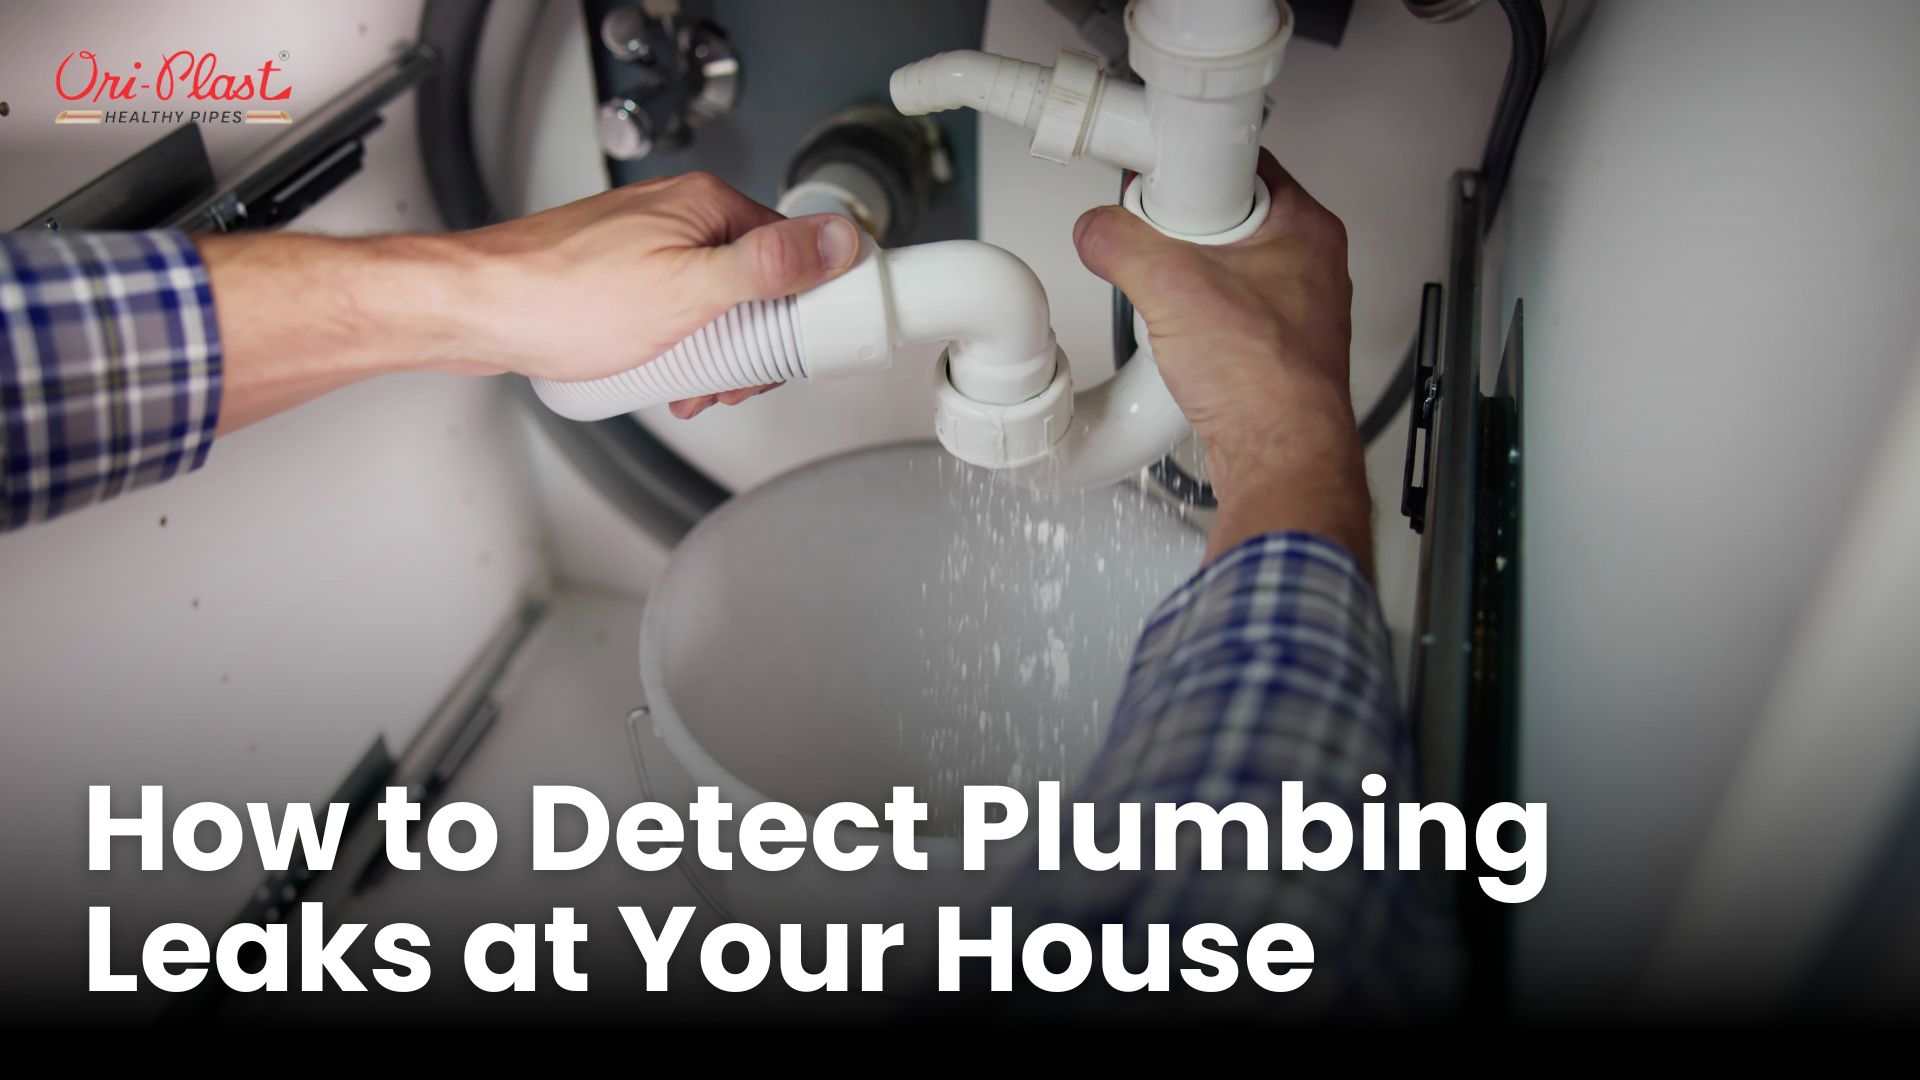 How to Detect Plumbing Leaks at Your House - Banner